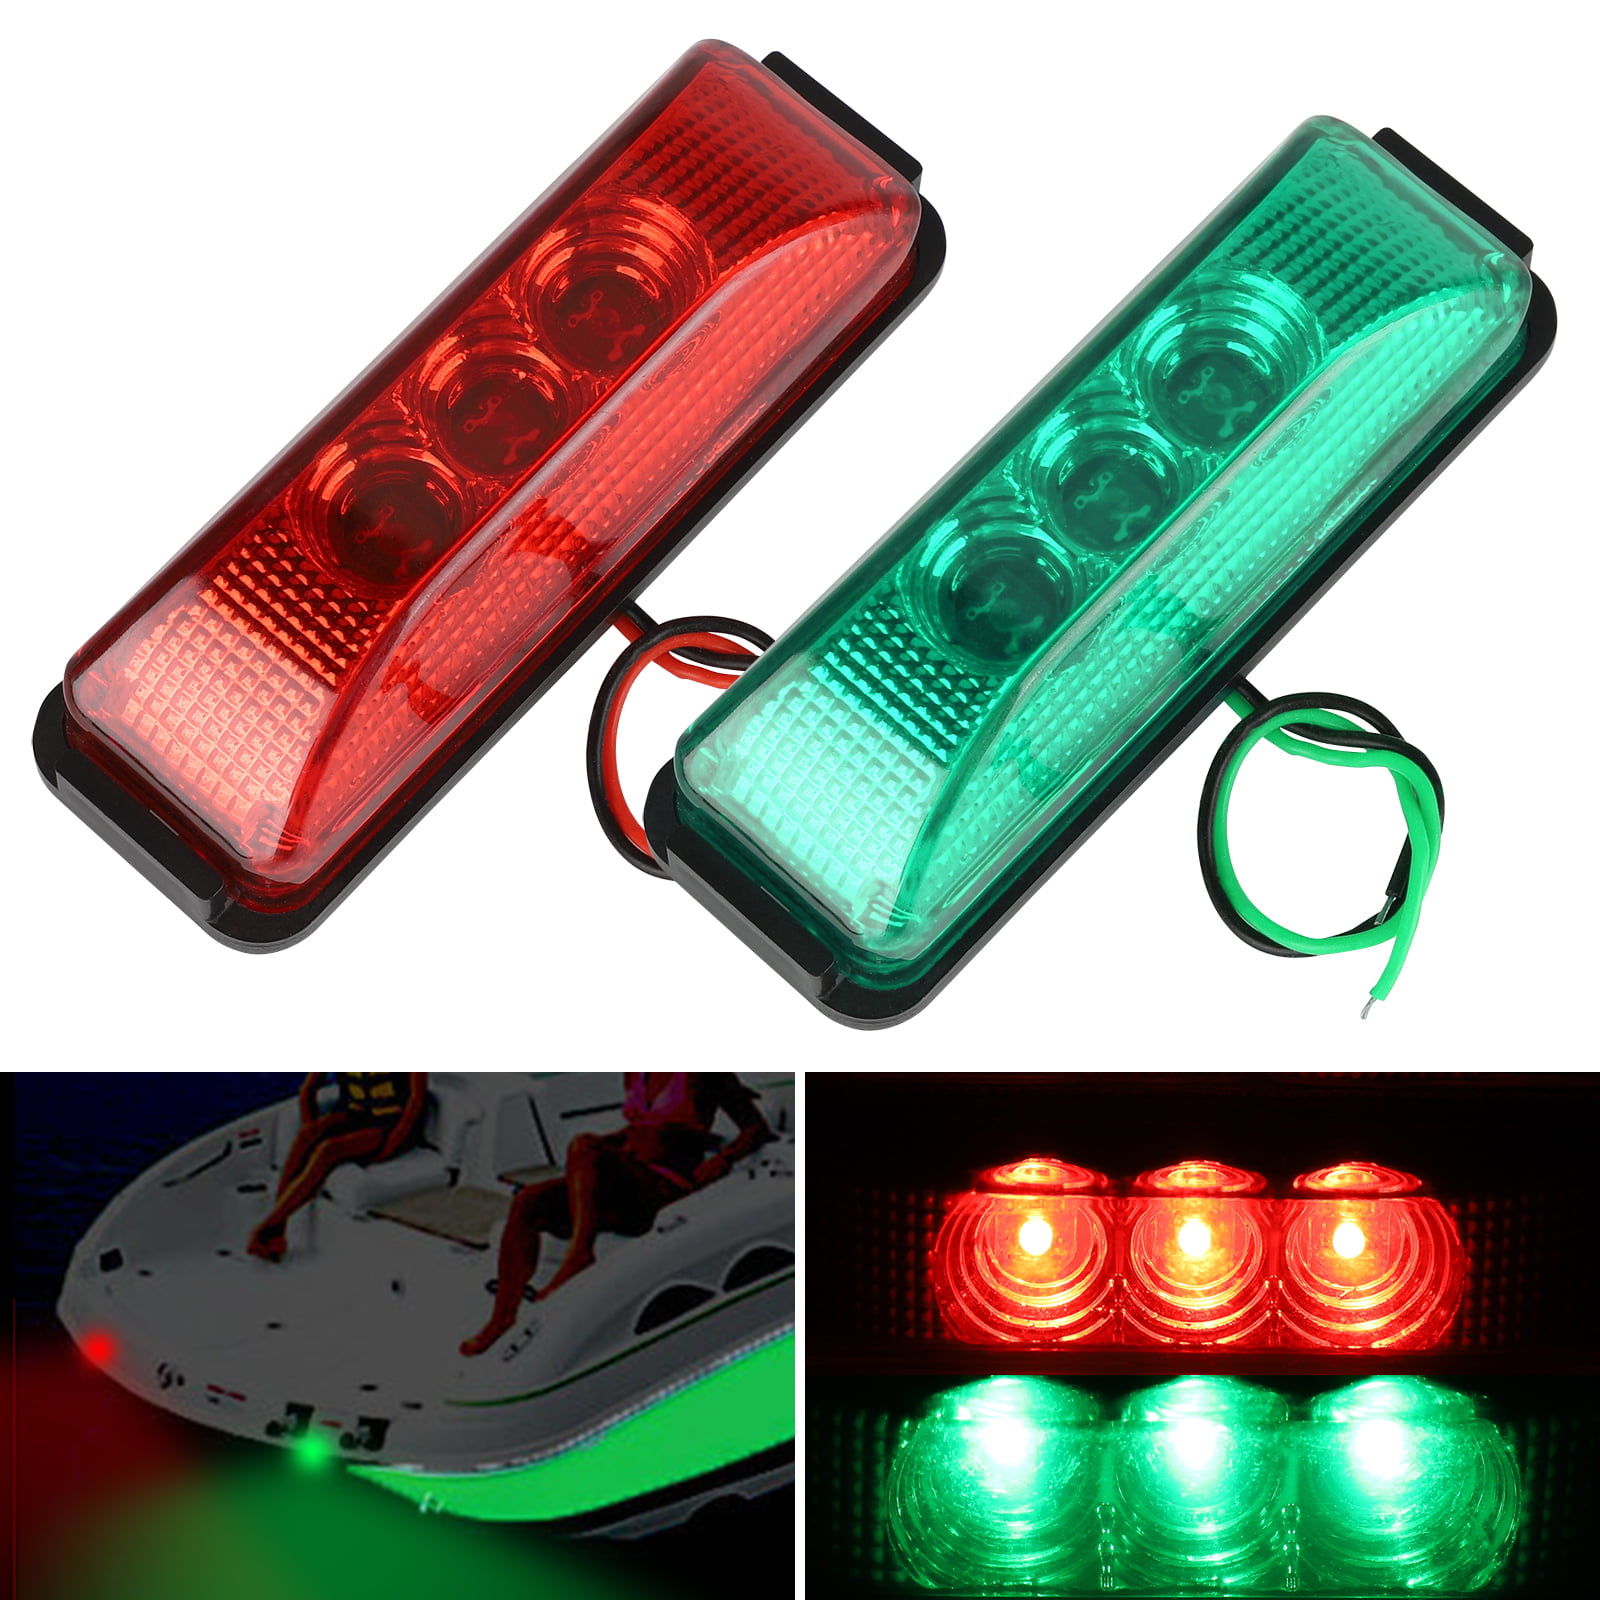 Led Navigation Lights Eeekit Boat Red And Green Bow Lights Boat Stern